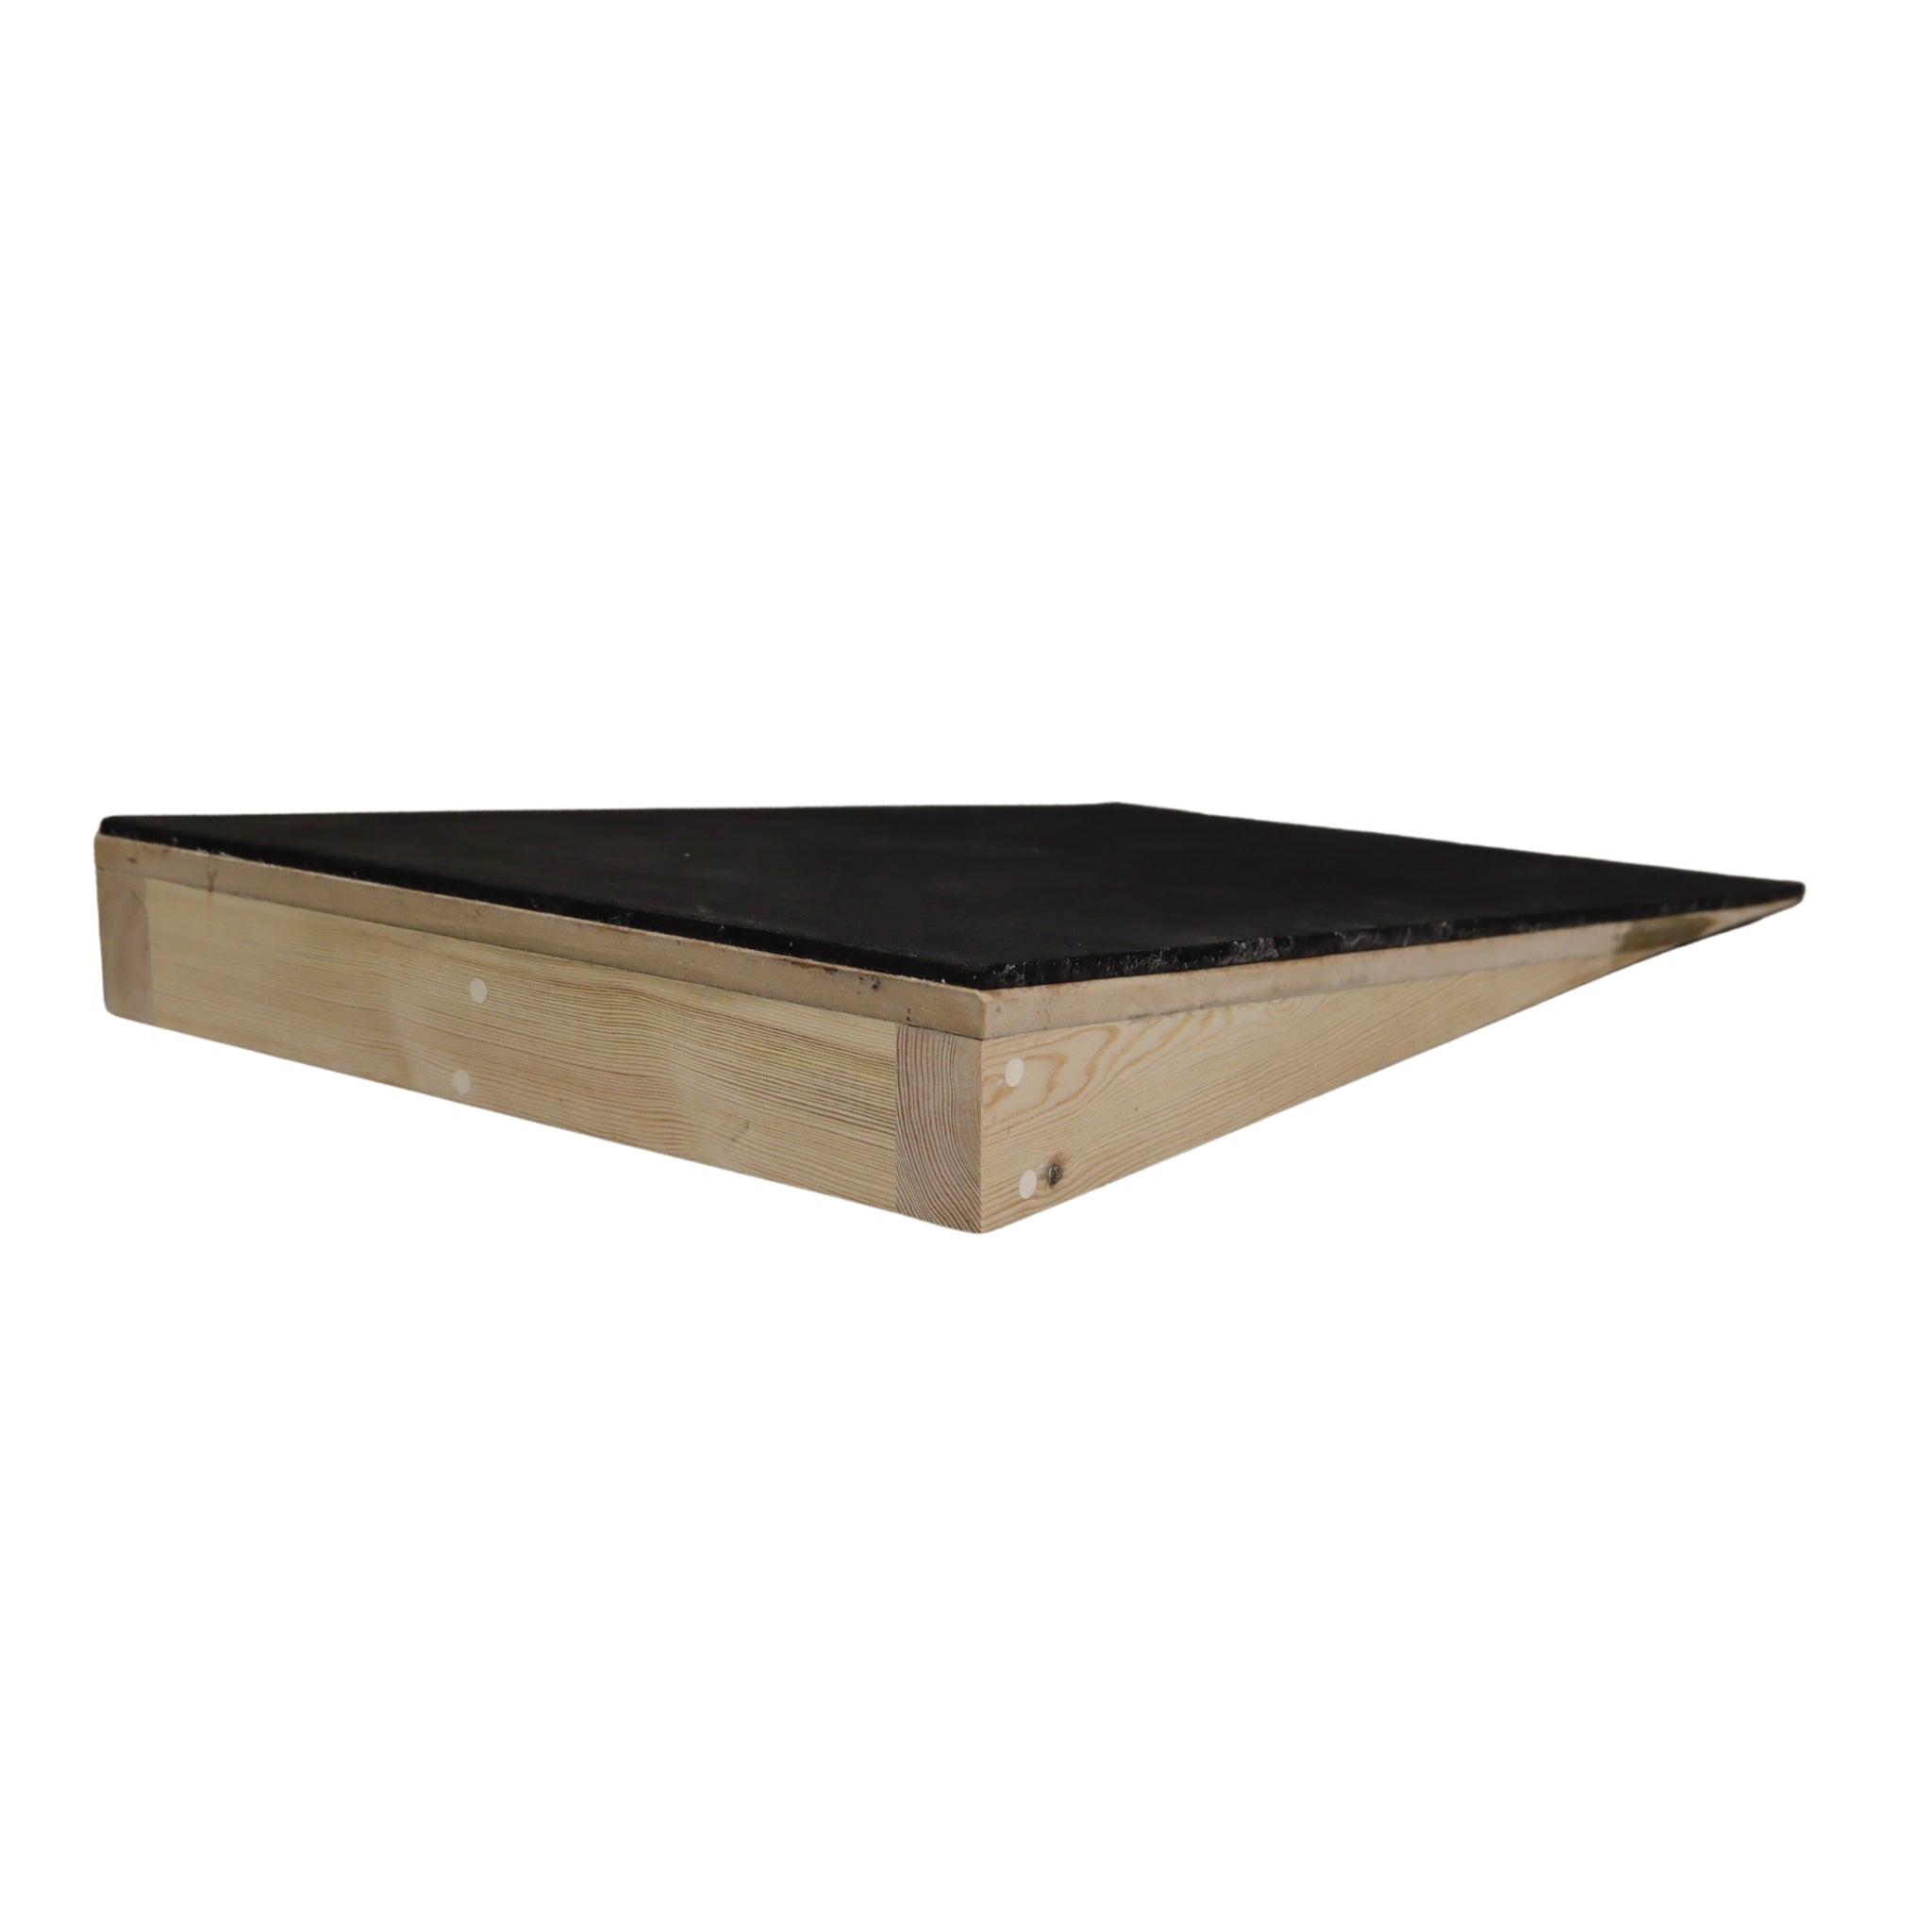 Wedge shaped wooden frame for a raised take off on jump training